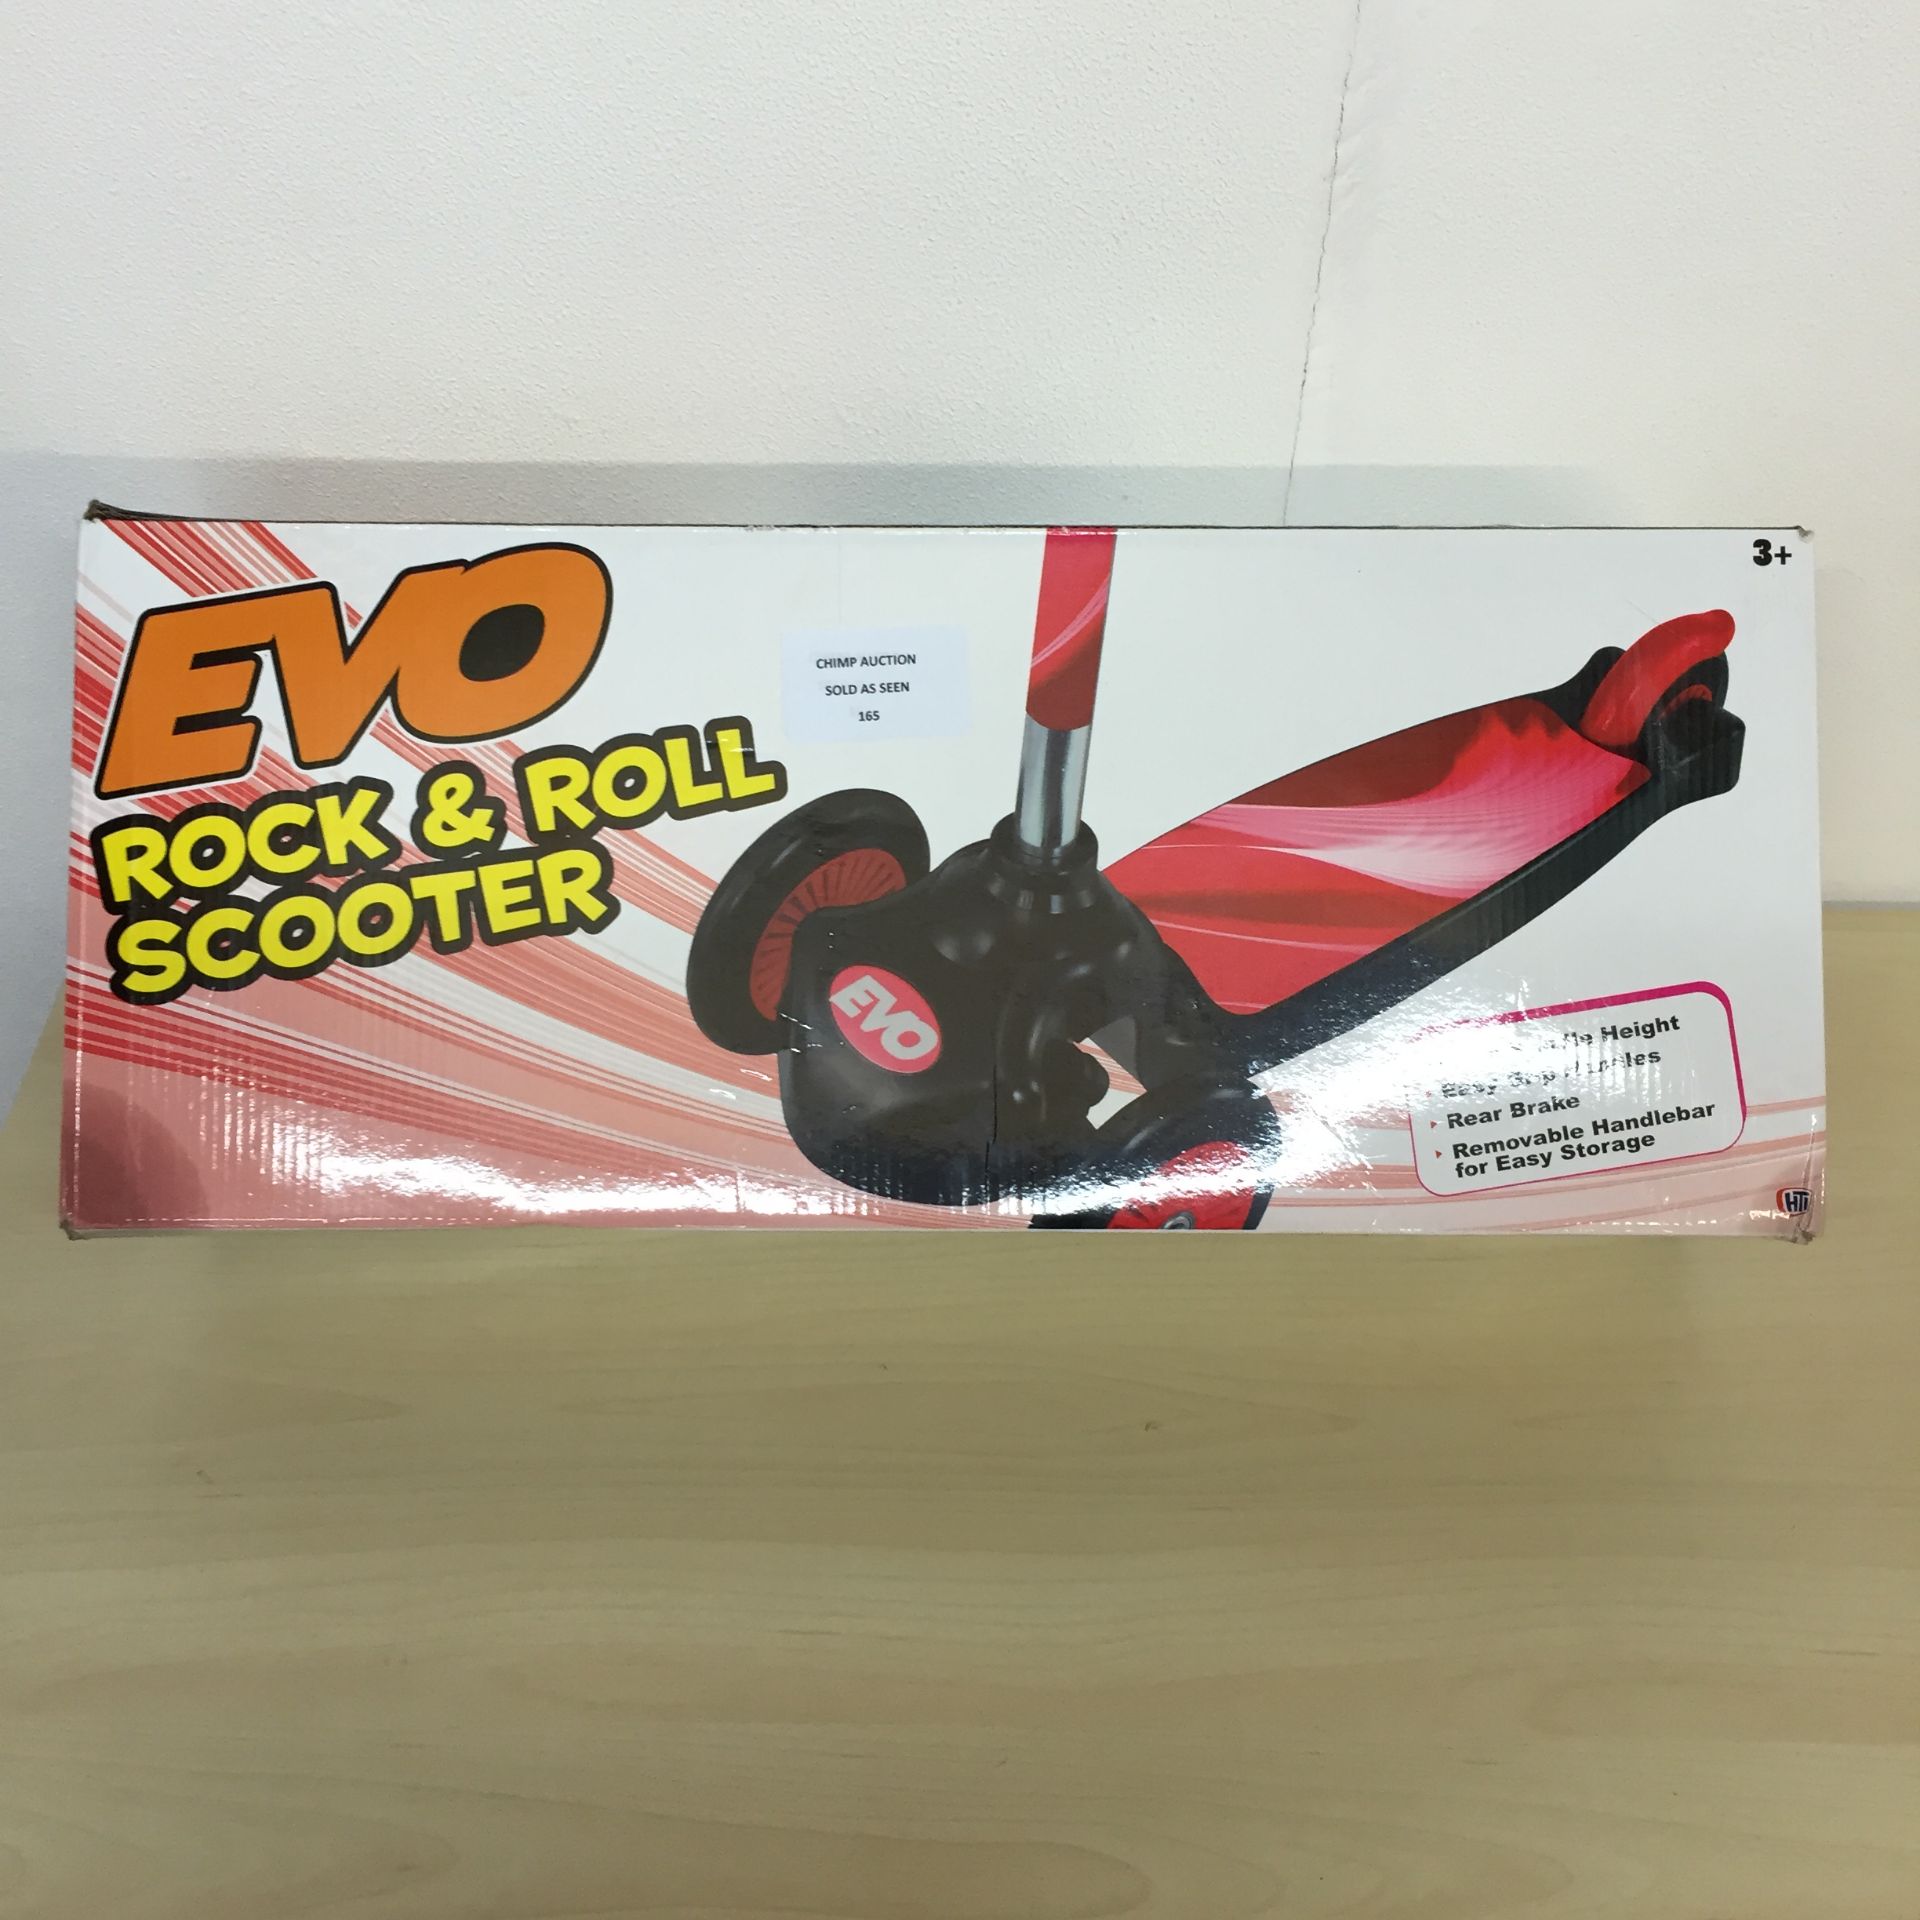 BOXED EVO ROCK & ROLL SCOOTER